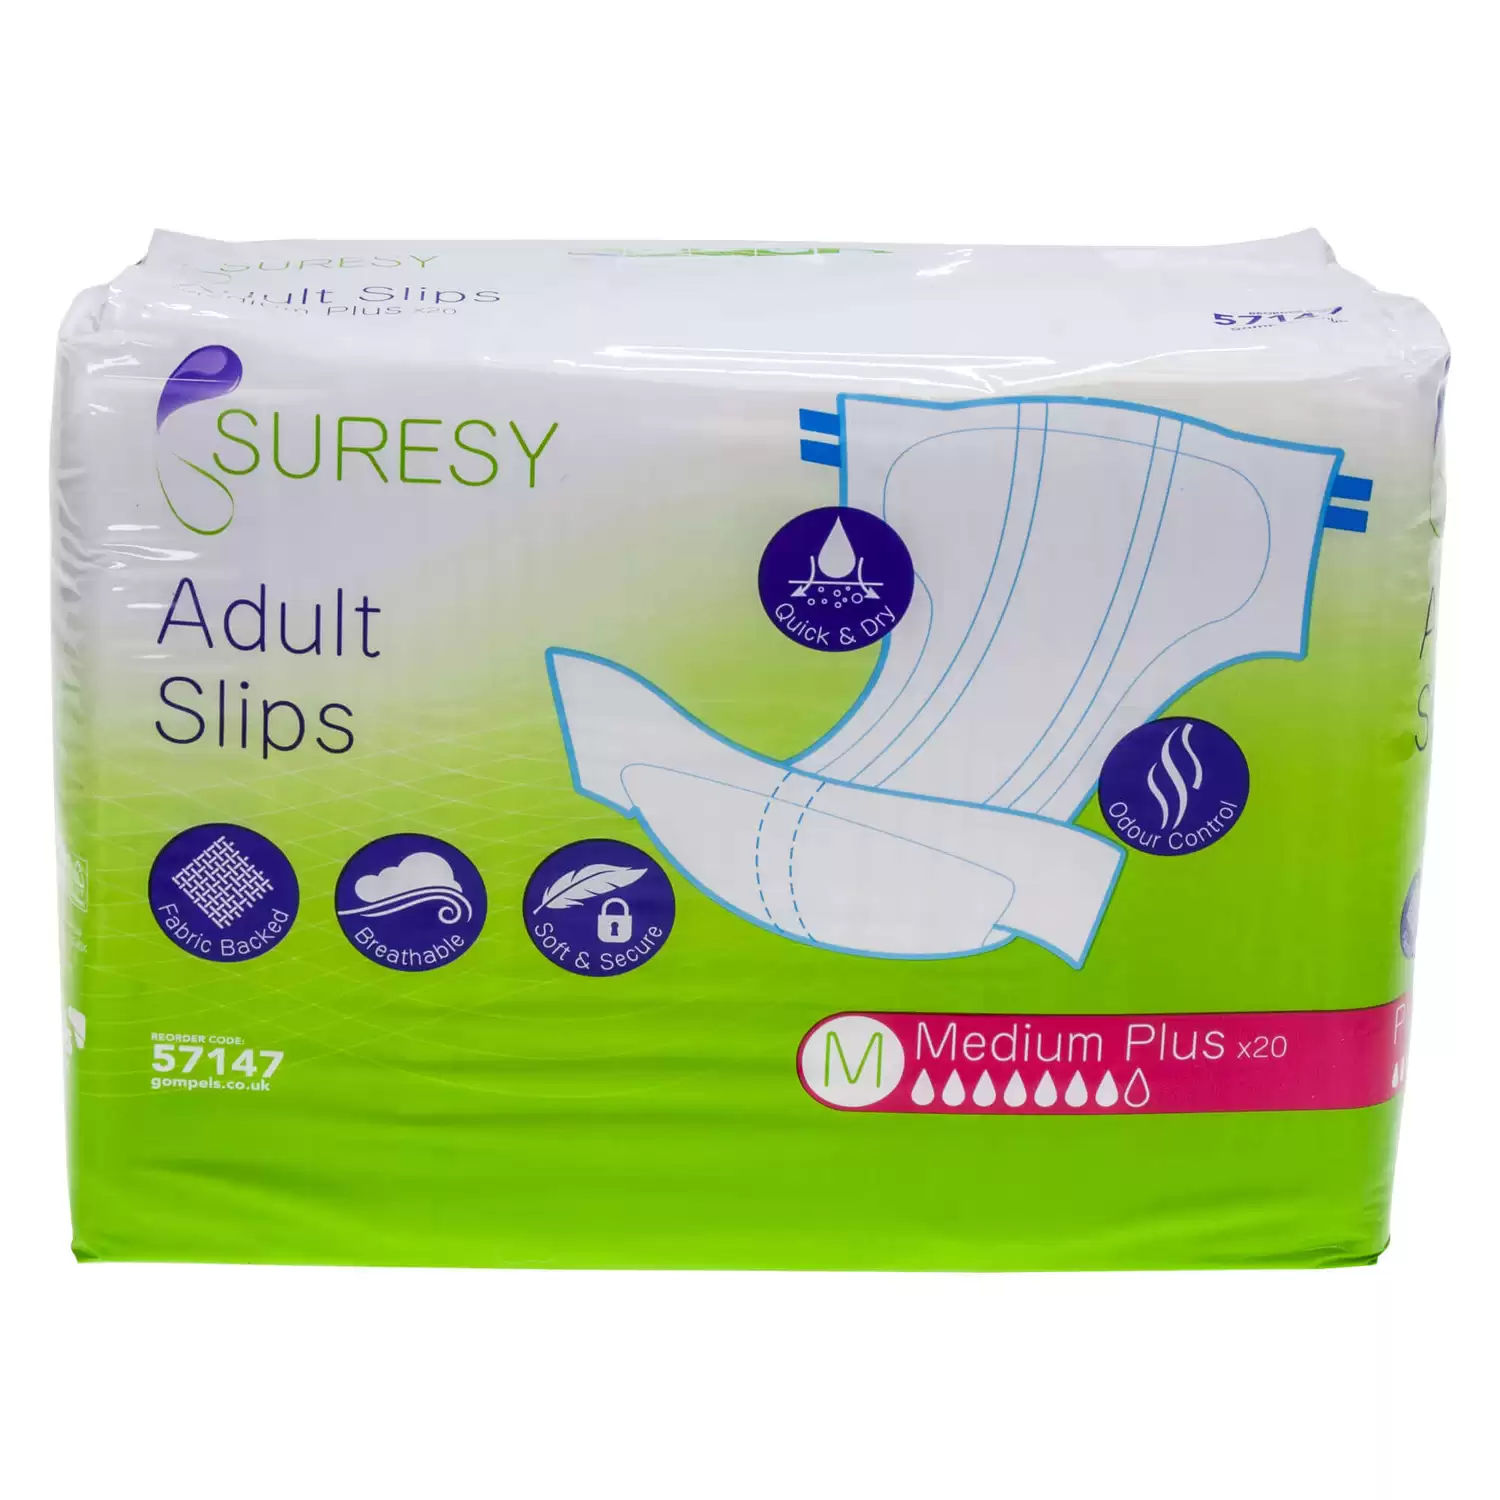 Suresy Slip Adult Nappies Medium Plus 20 Pack - Gompels - Care & Nursery  Supply Specialists